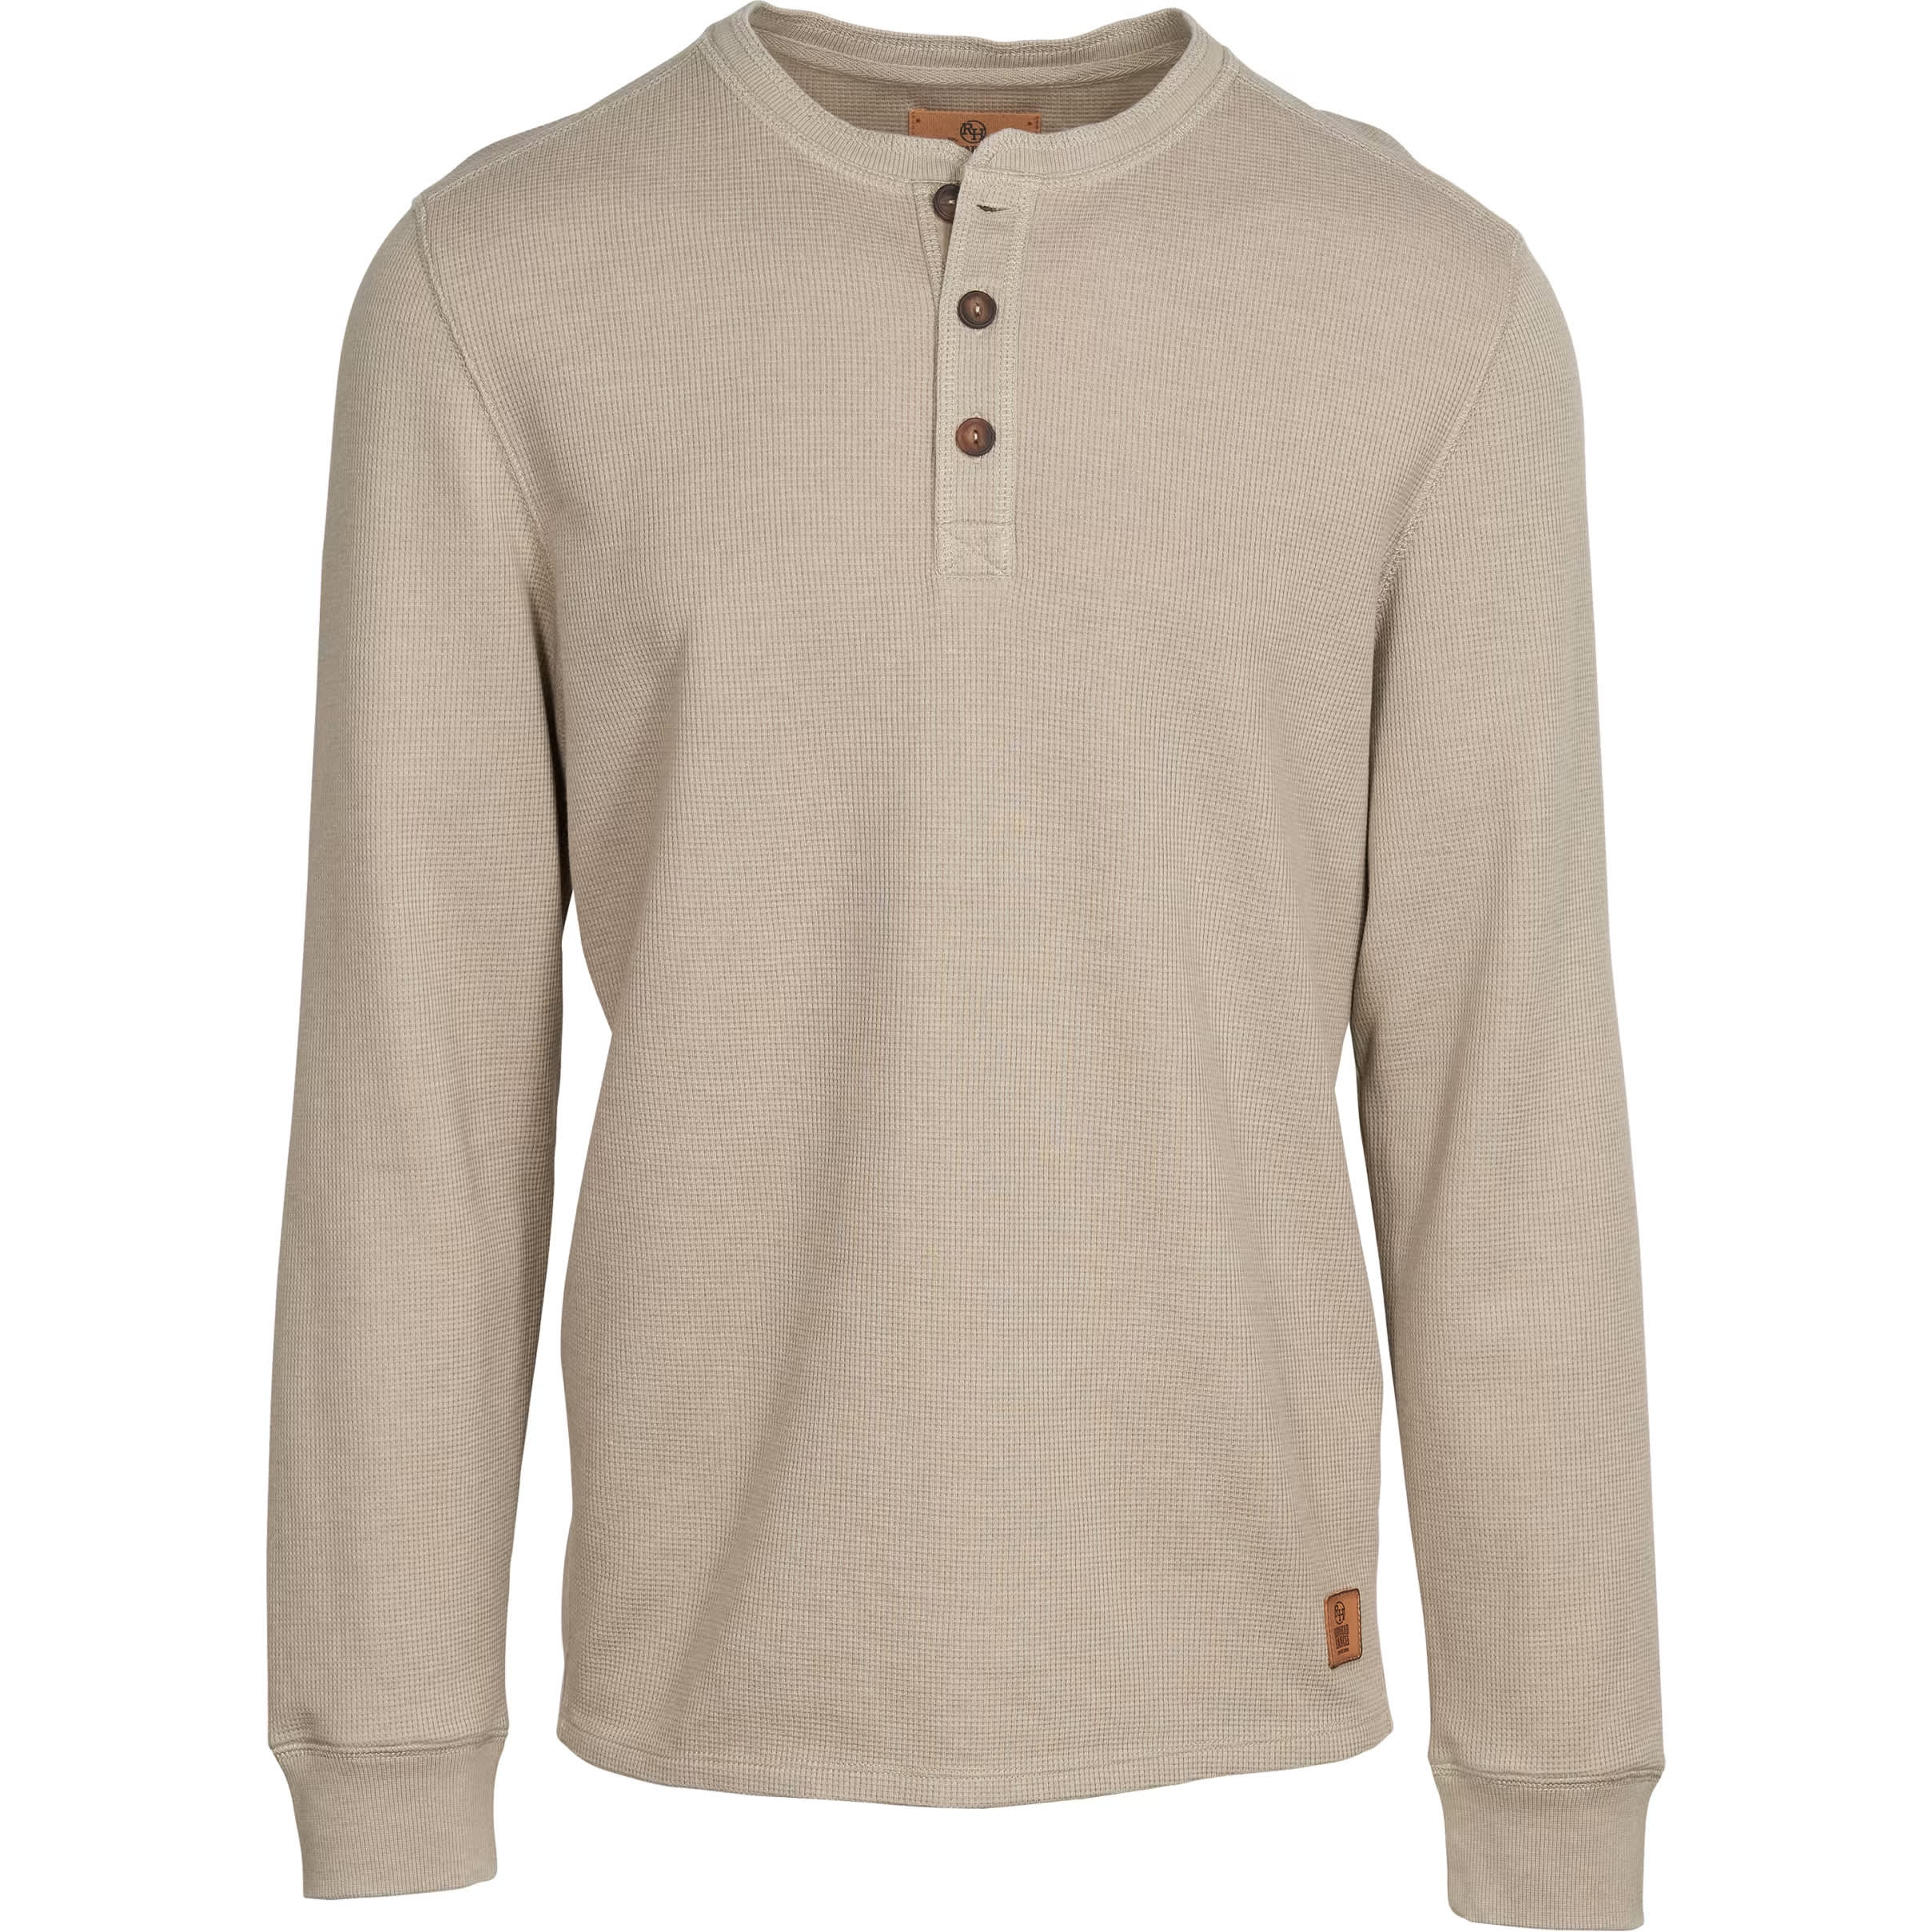 RedHead® Men's Ranch Grand Forks Waffle-Knit Long-Sleeve Henley